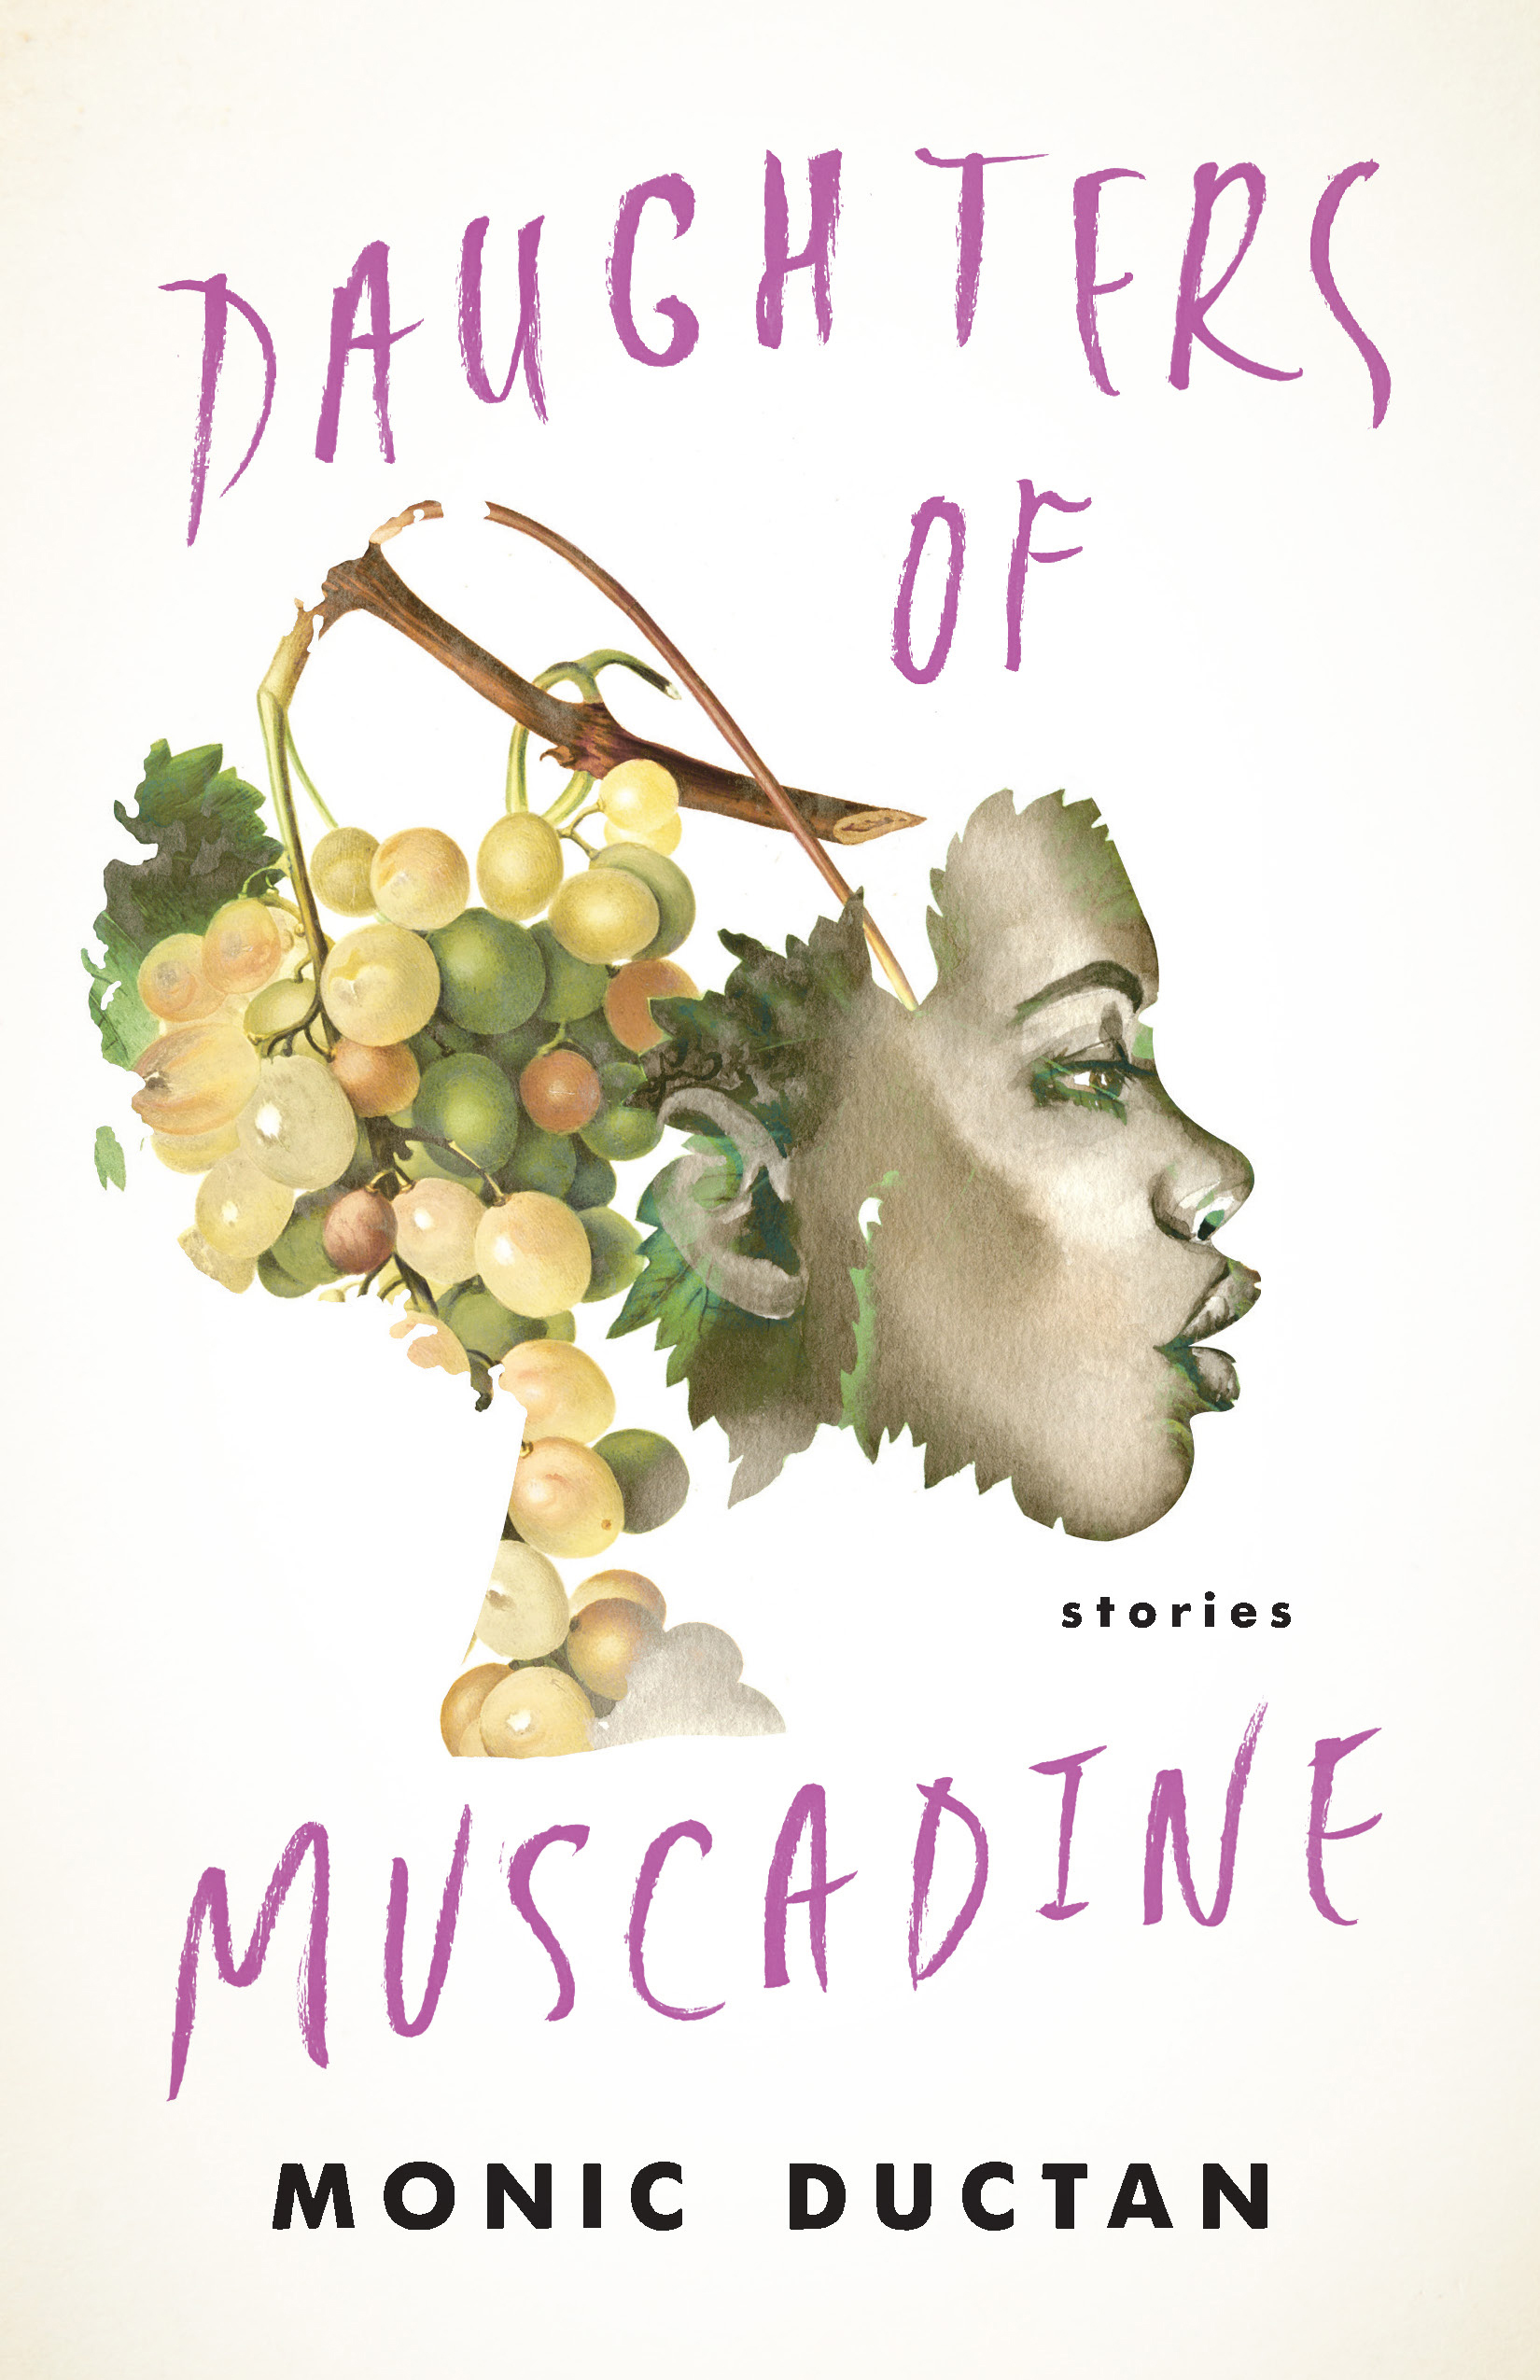 Monic Ductan to Participate in the Kentucky Book Festival with “Daughters of Muscadine”